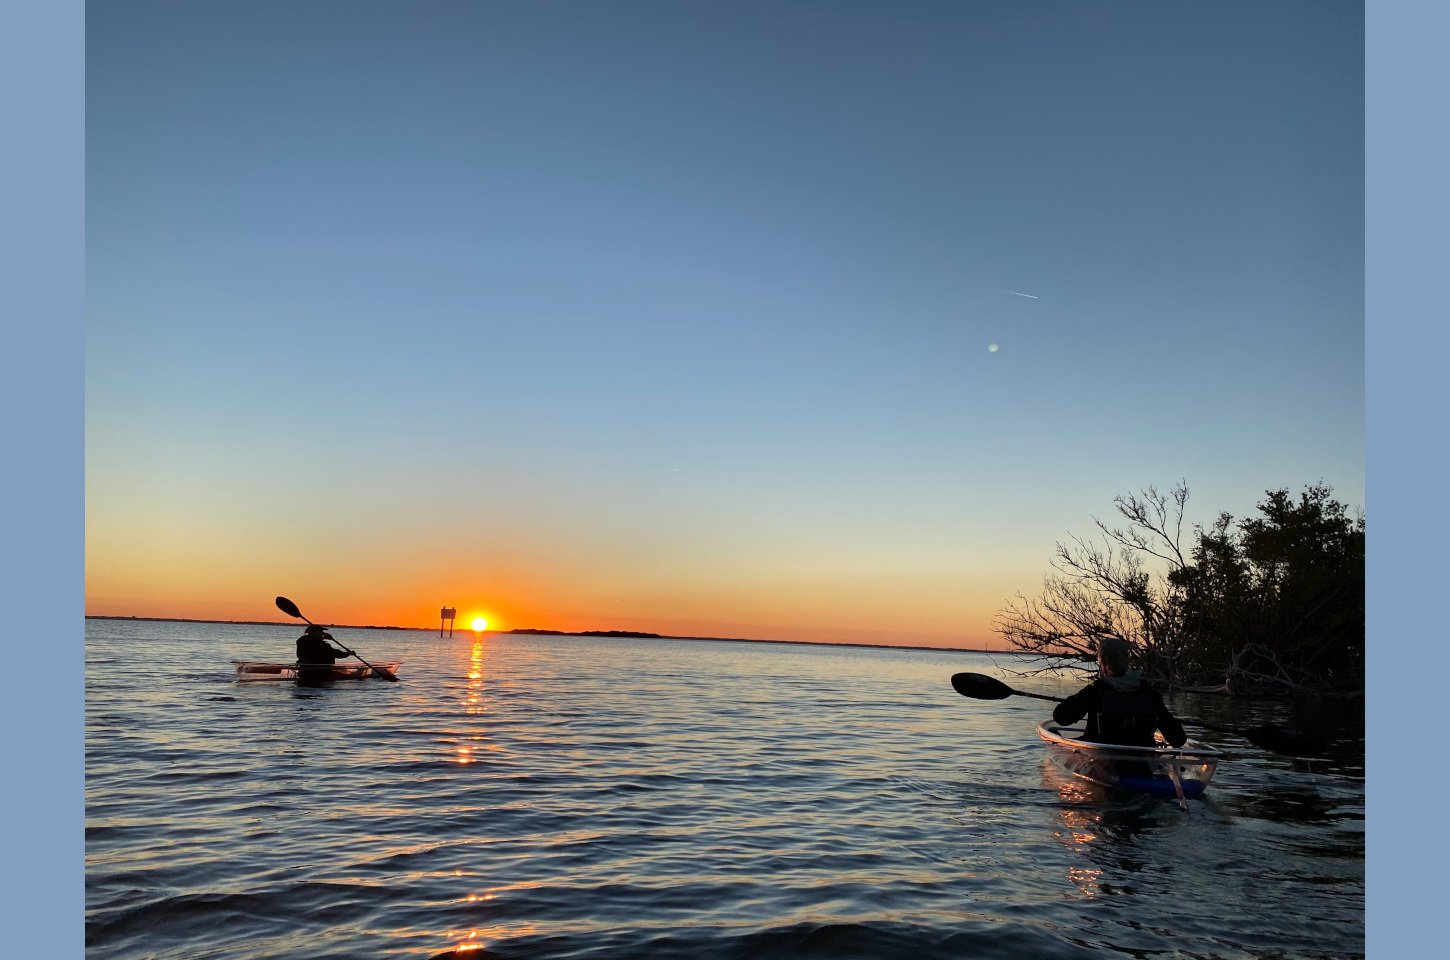 Kayakers on the Indian River at sunset